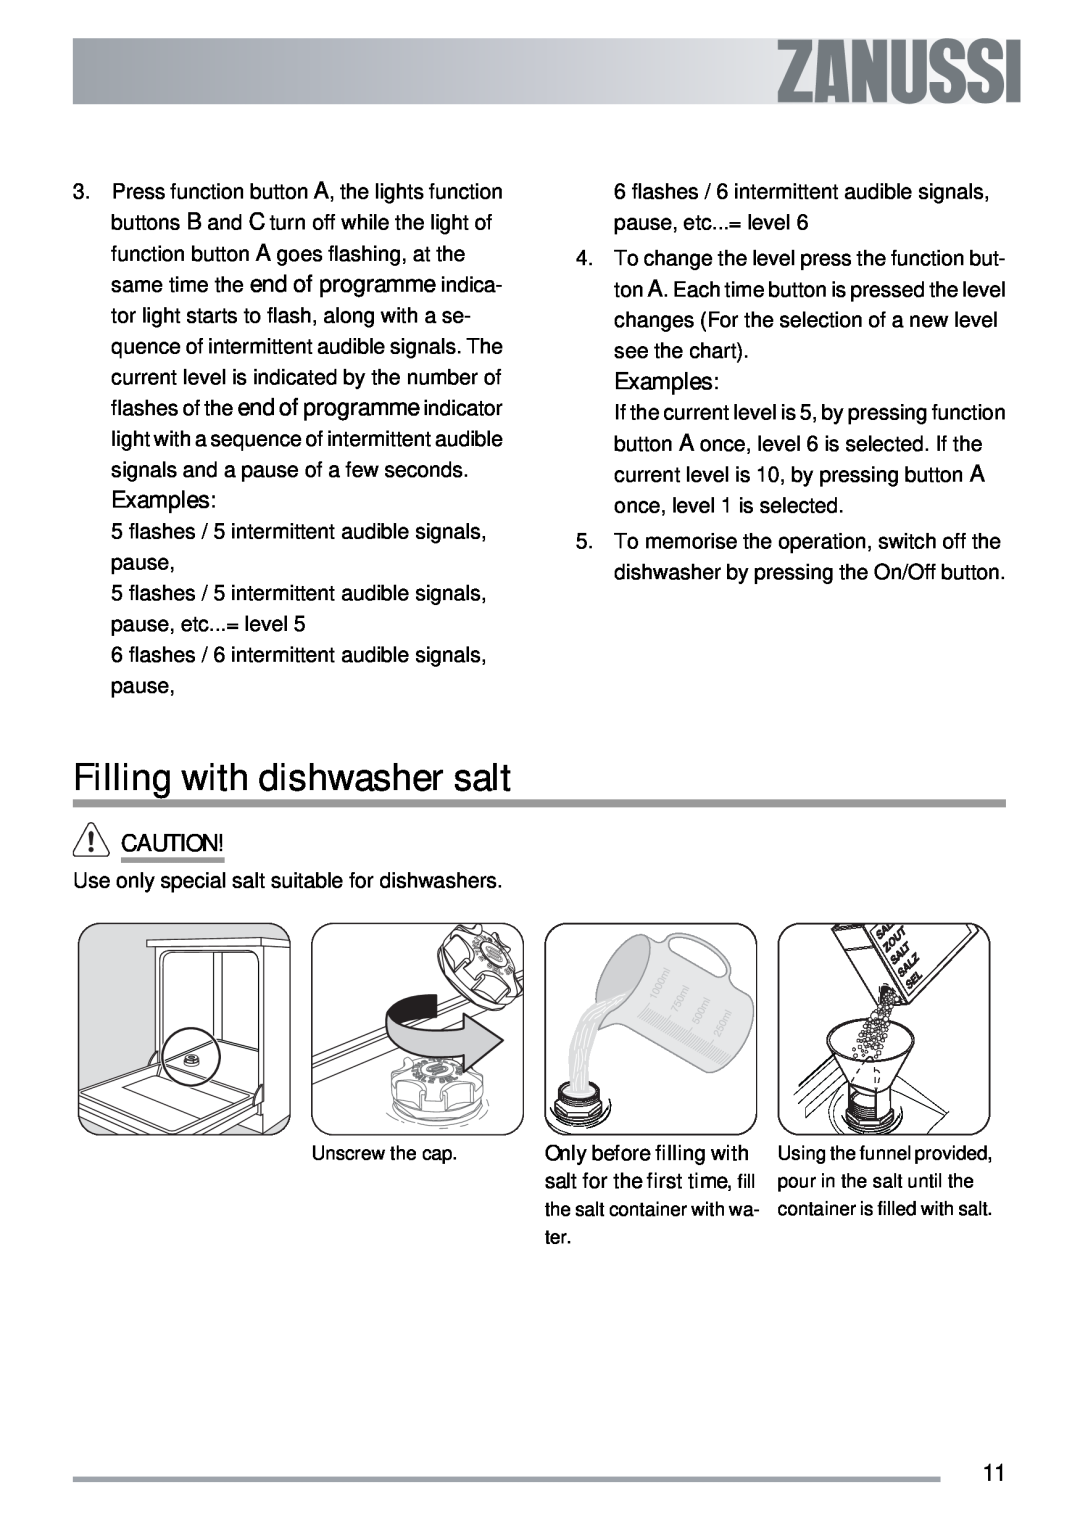 Zanussi ZDT 311 user manual Filling with dishwasher salt, Examples, flashes / 5 intermittent audible signals, pause 